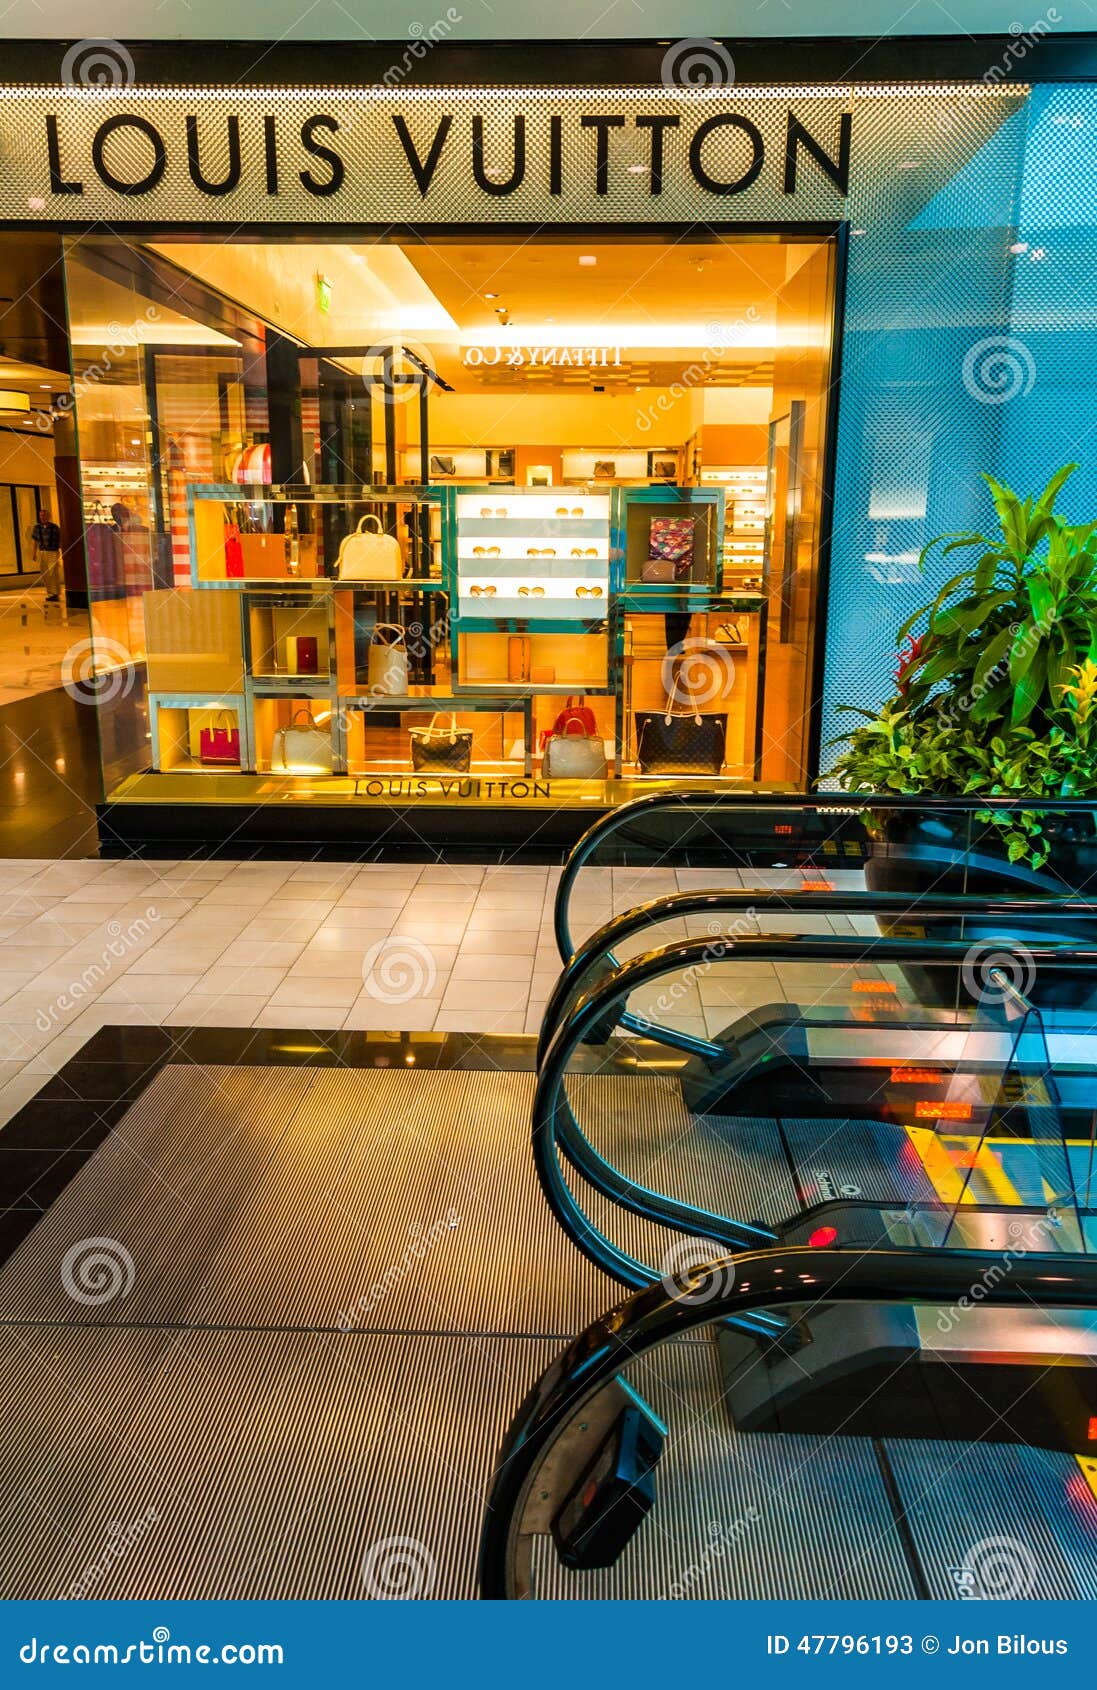 Escalators And The Louis Vuitton Store In Towson Town Center, Ma Editorial Stock Photo - Image ...